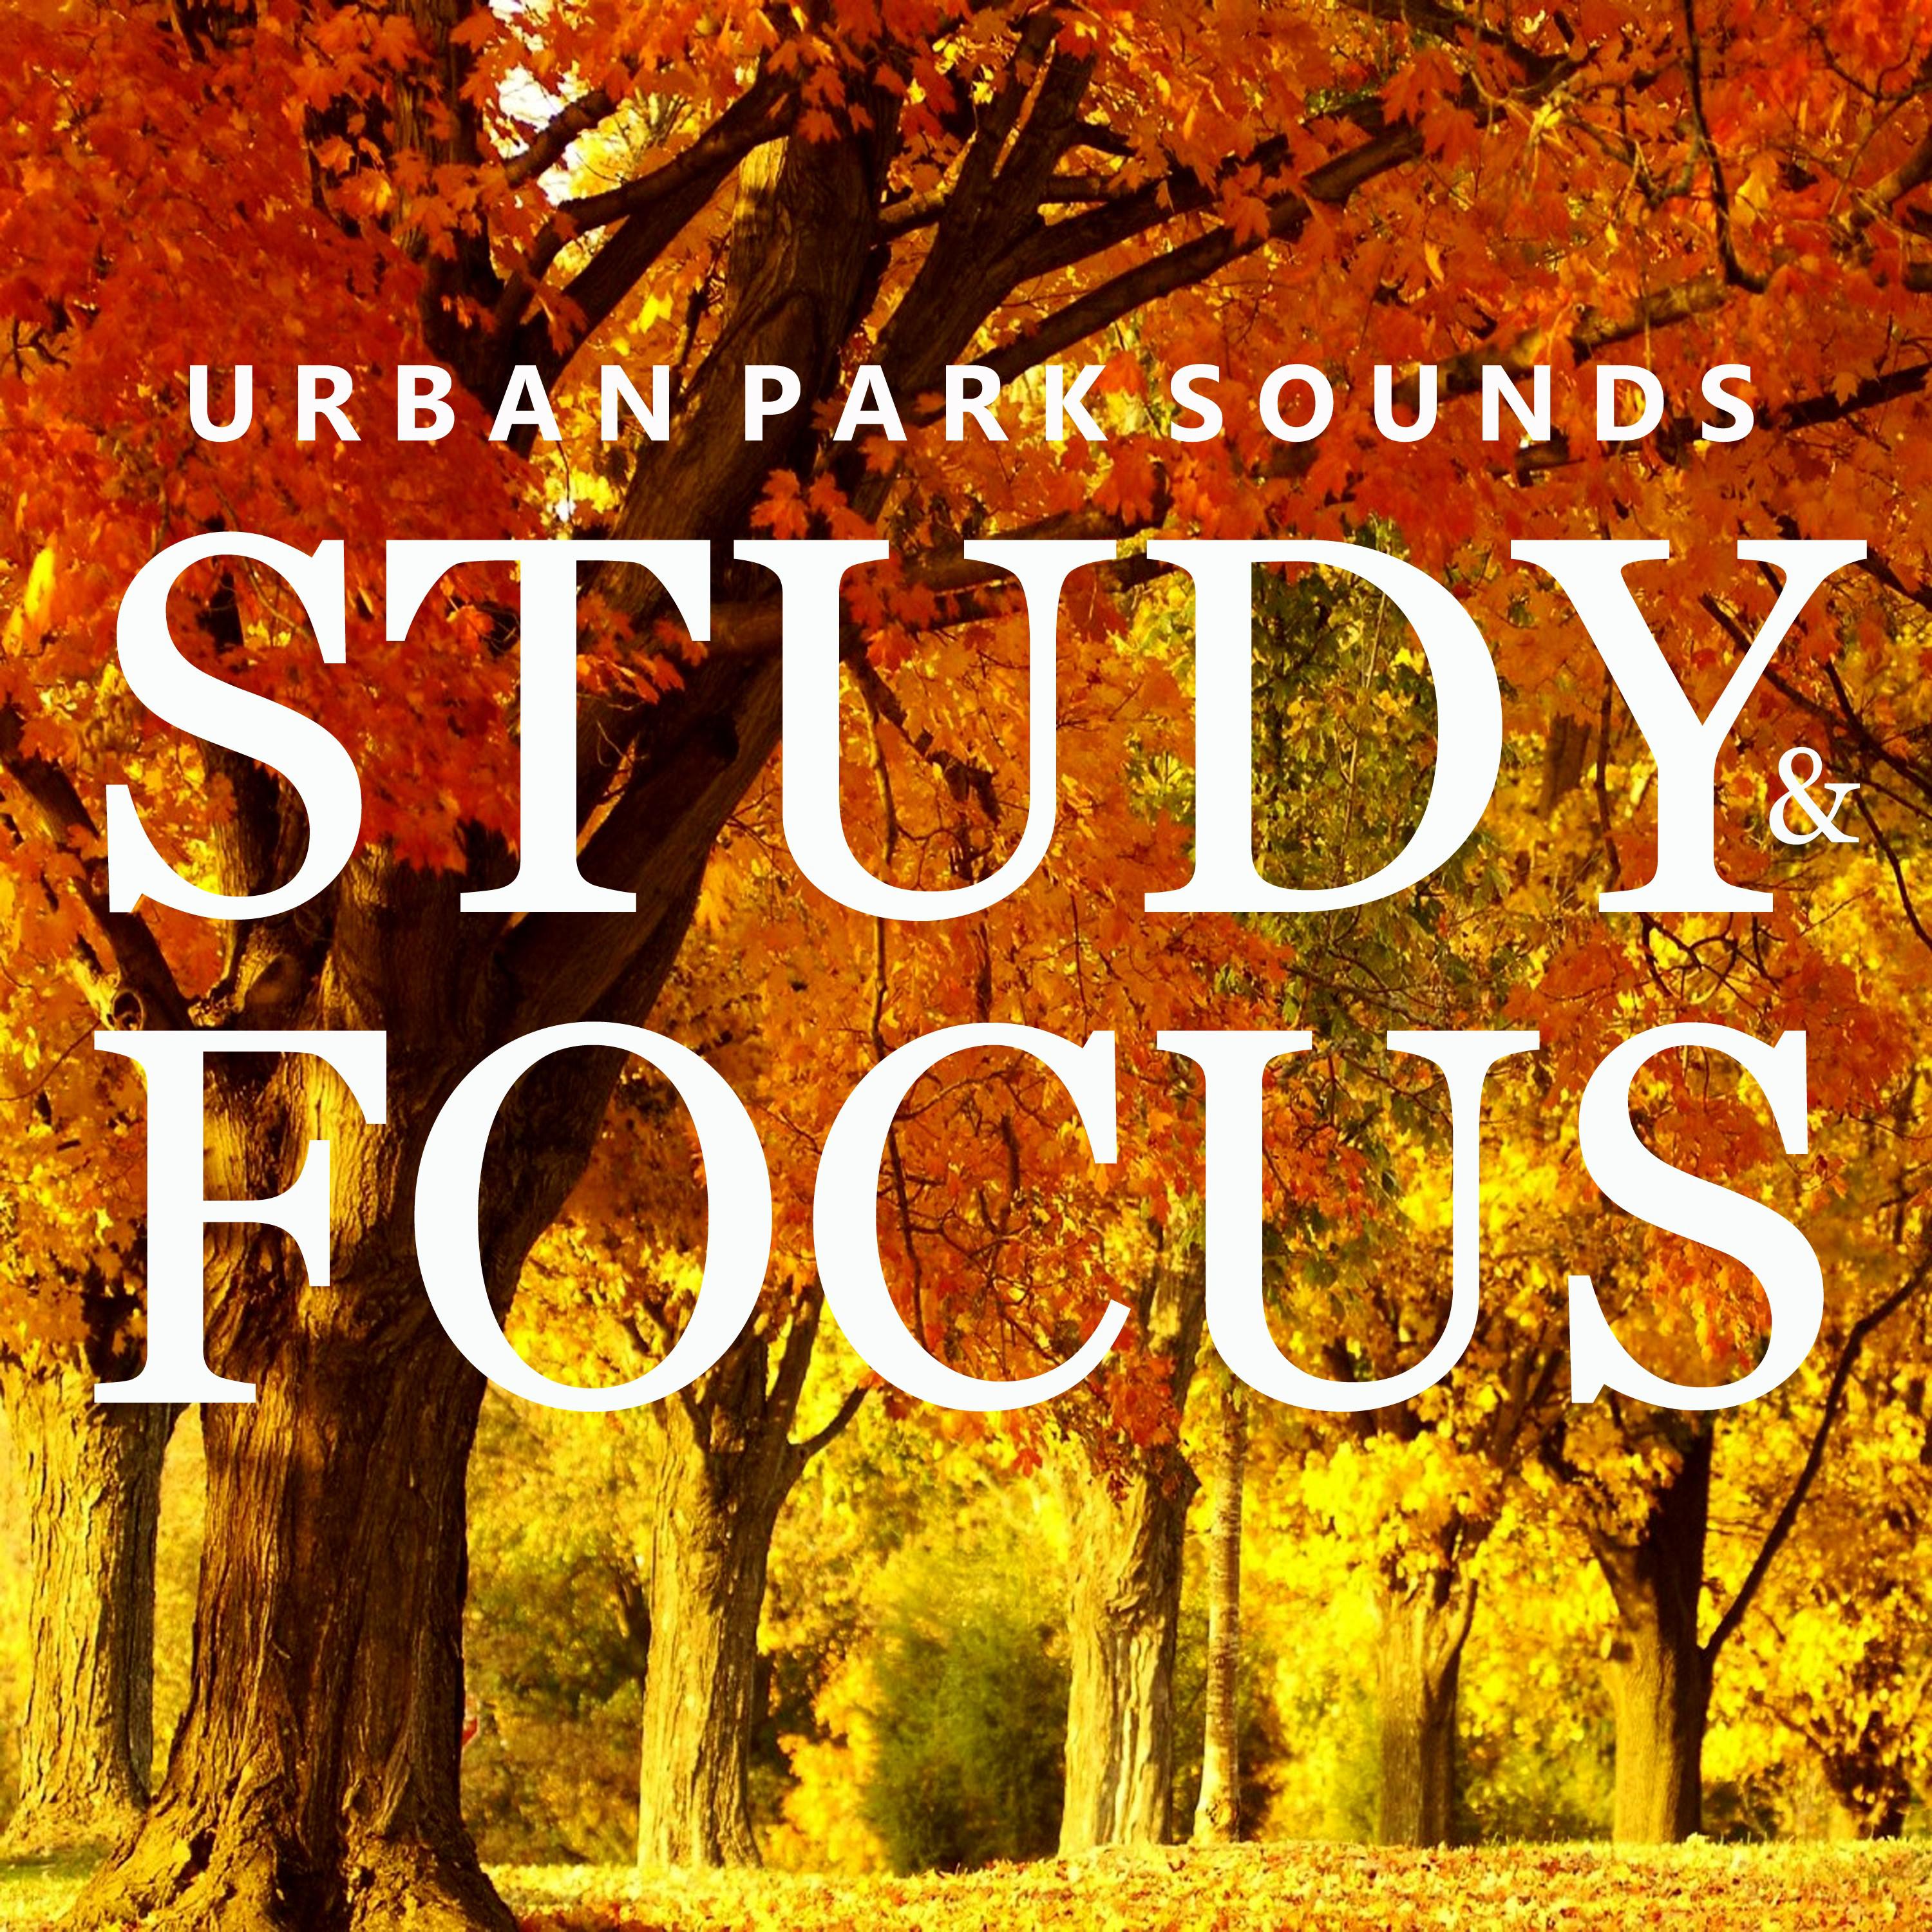 Urban Park Sounds for Studying, Pt. 46